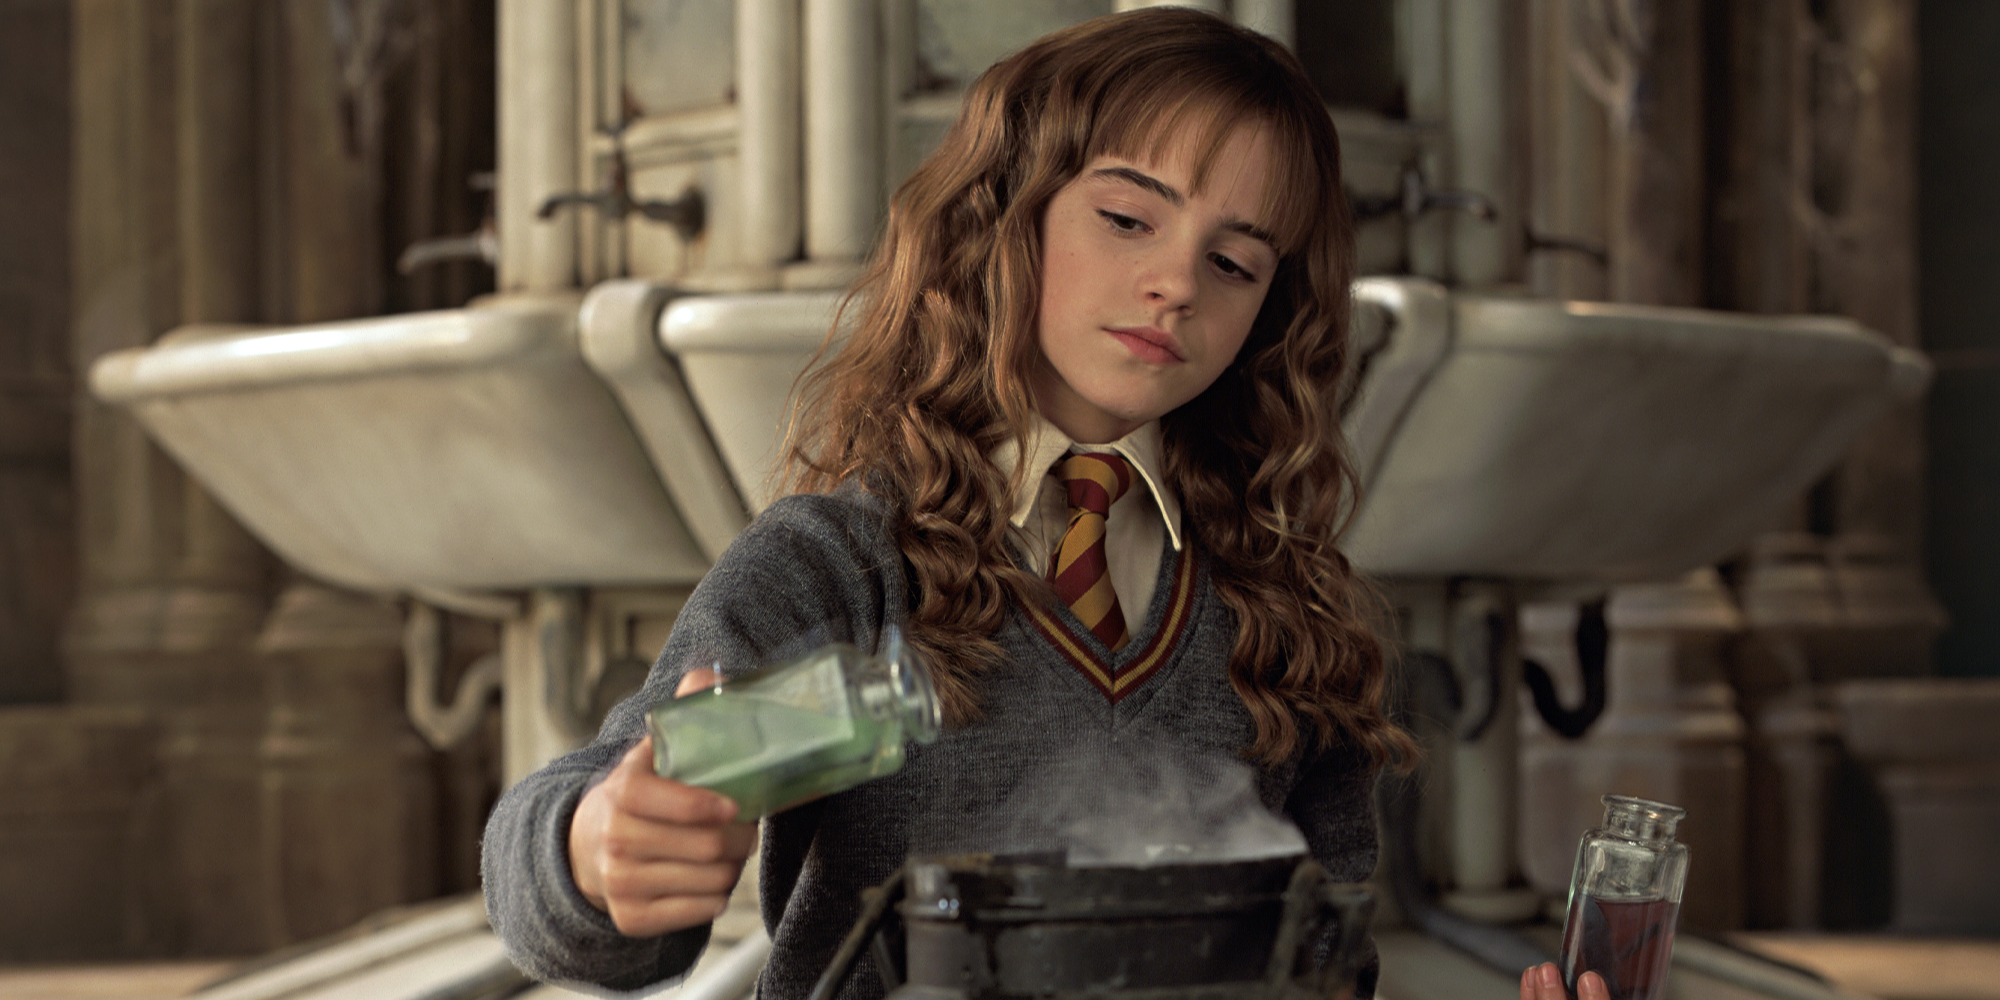 Hermione sits in a bathroom brewing Polyjuice Potion